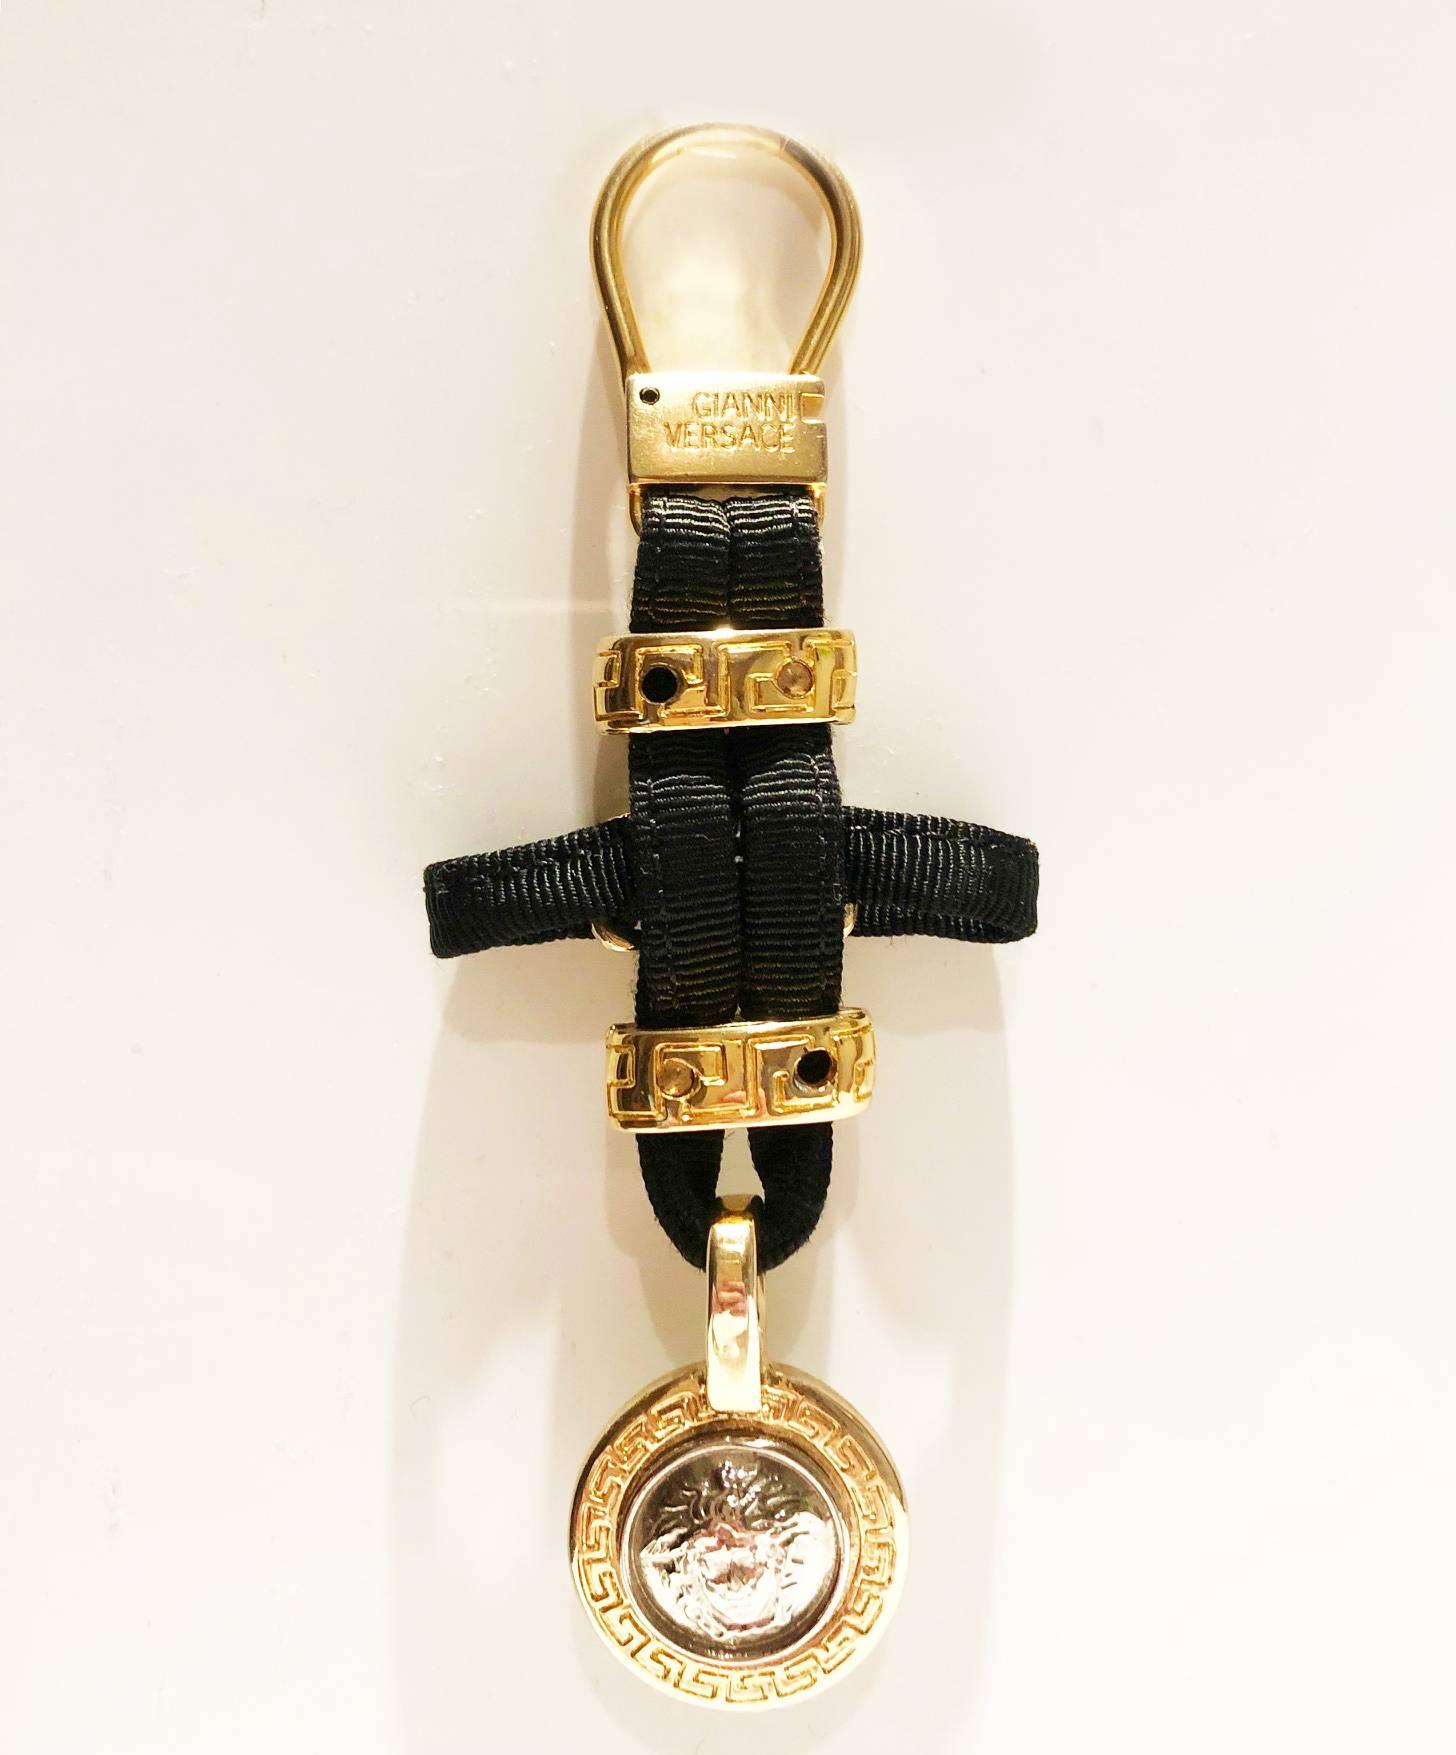 FREE UK and WORLDWIDE DELIVERY 

Iconic Limited Edition Gianni Versace Medusa Medallion key ring bag charm, black grosgrain , gold and silver medusa metal details key ring or bag charm.

Condition: 1990s, vintage, excellent new 
Measurements: 13cm